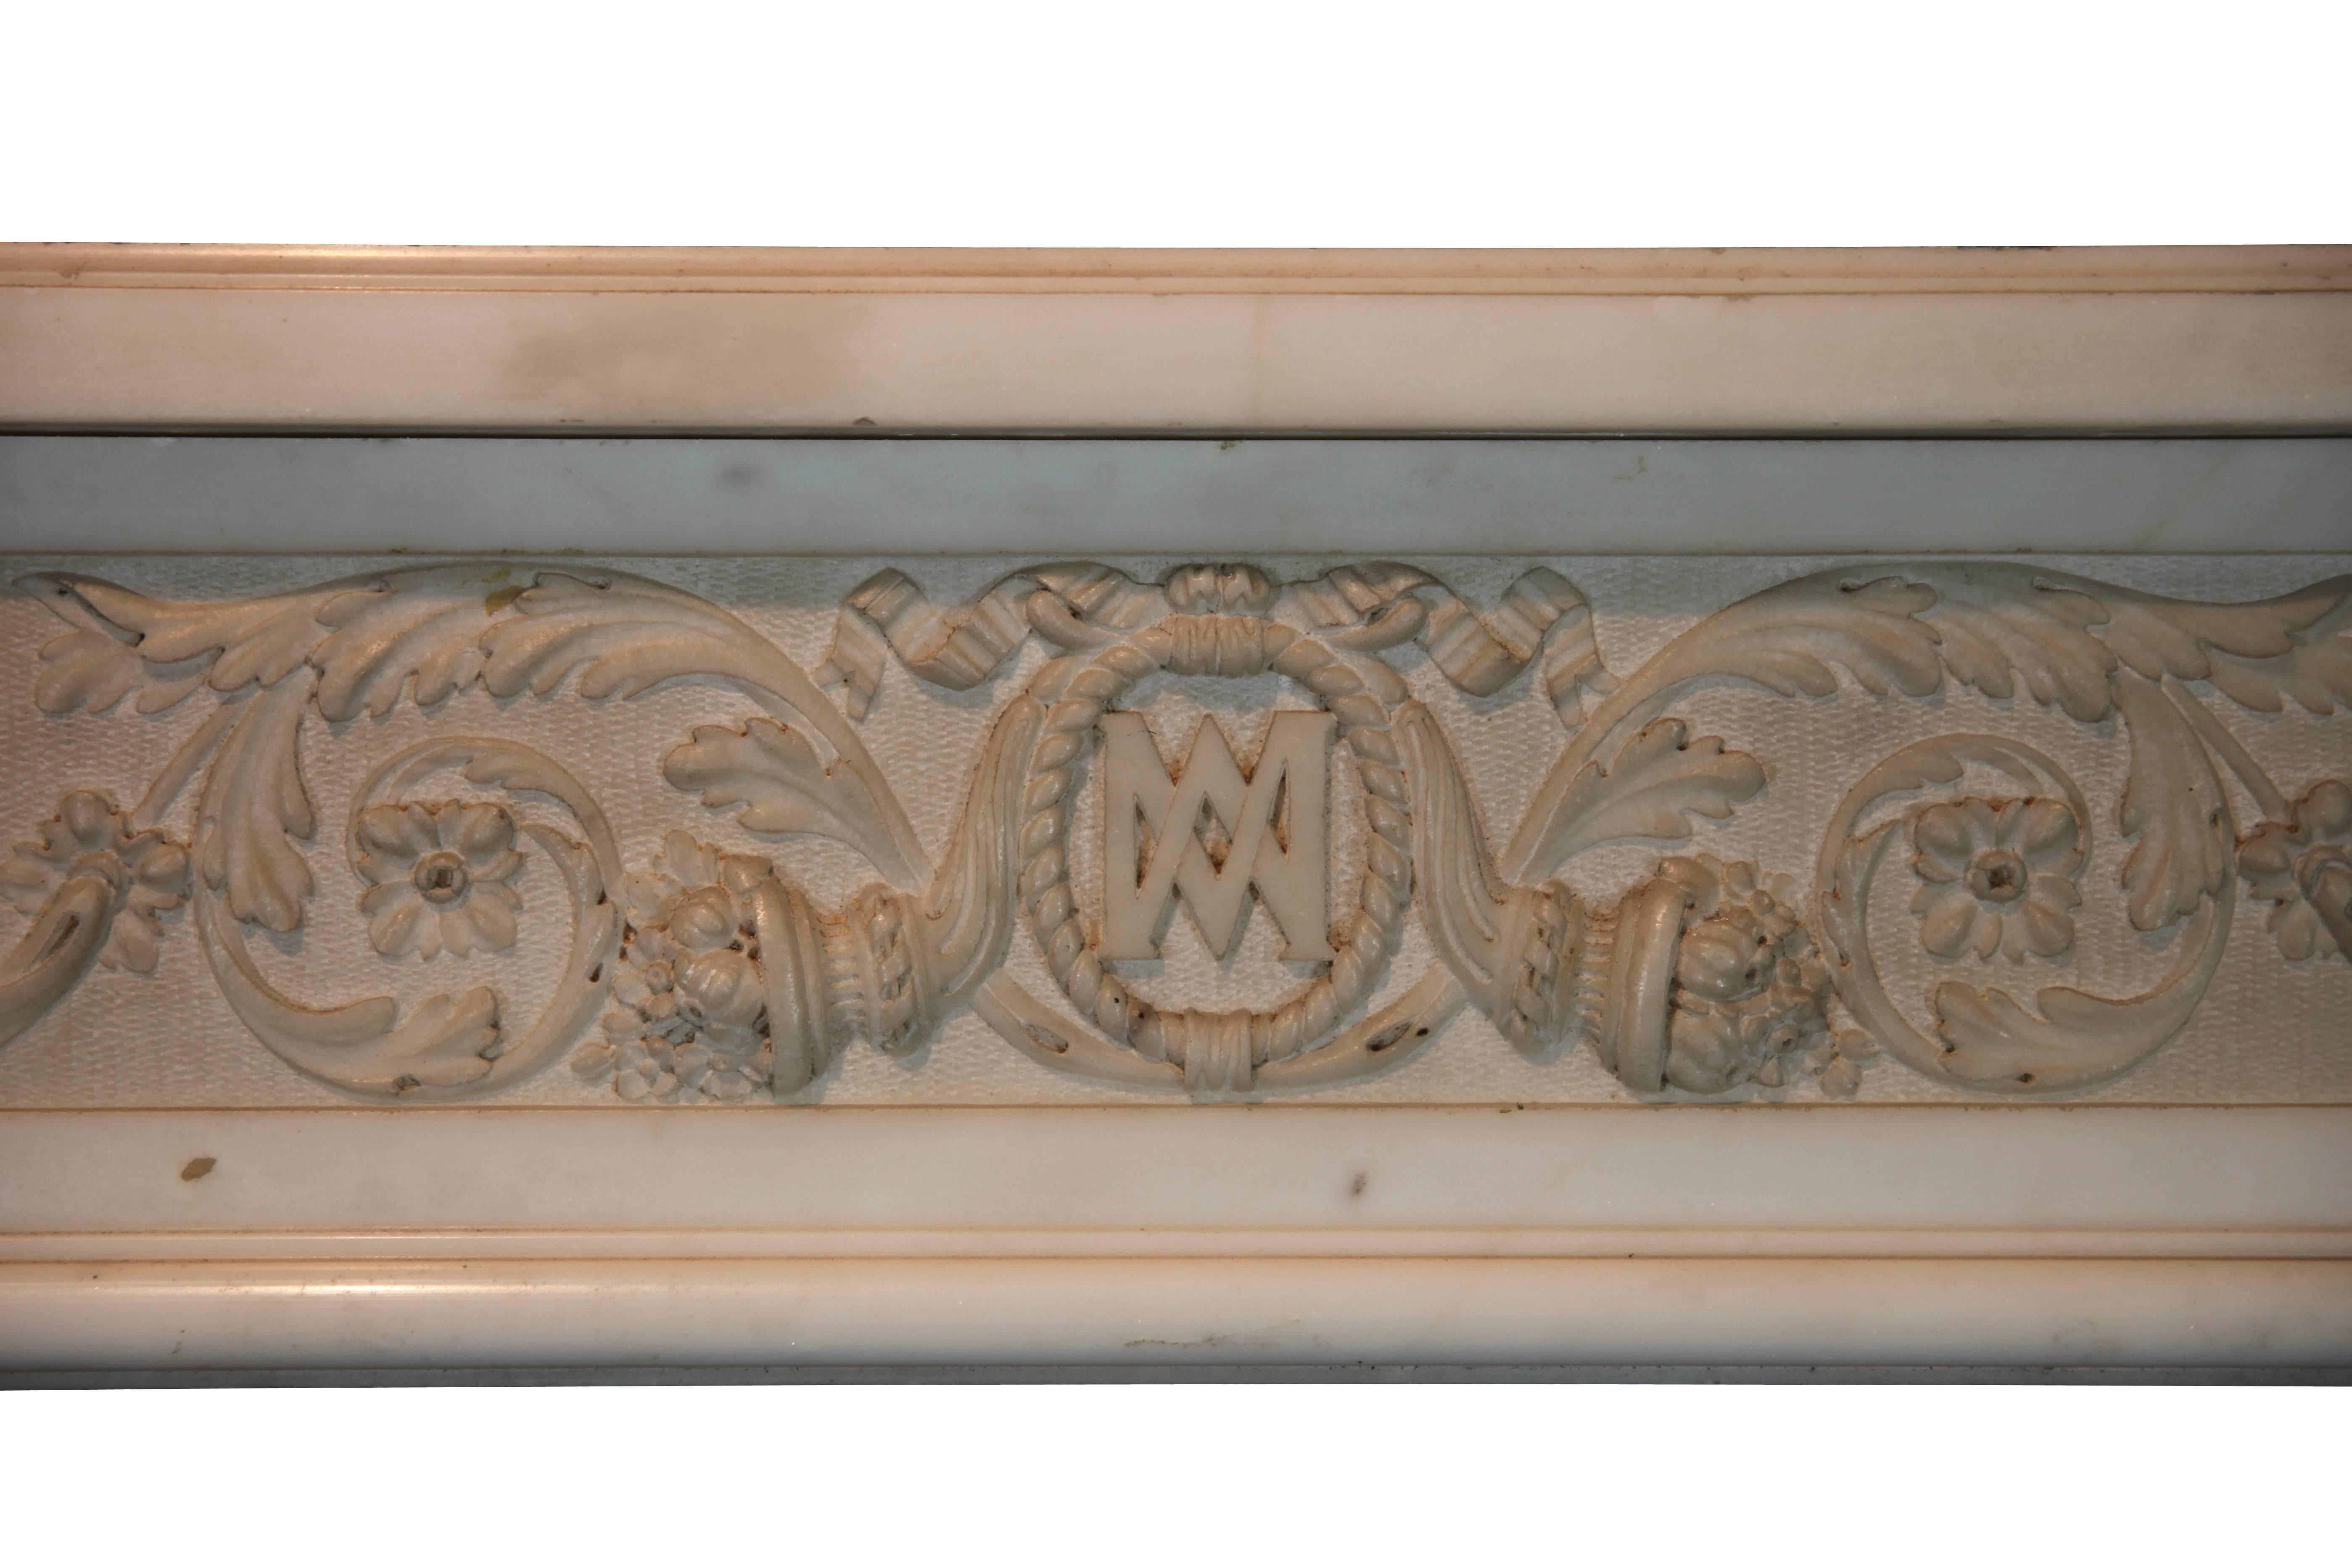 This is another one of a kind original fireplace surround in White Statuary Marble. The marble of the mantle has a nice patina. Very fine details in the carving. A great condition of the chimneypiece and from the Louis XVI period, 18th